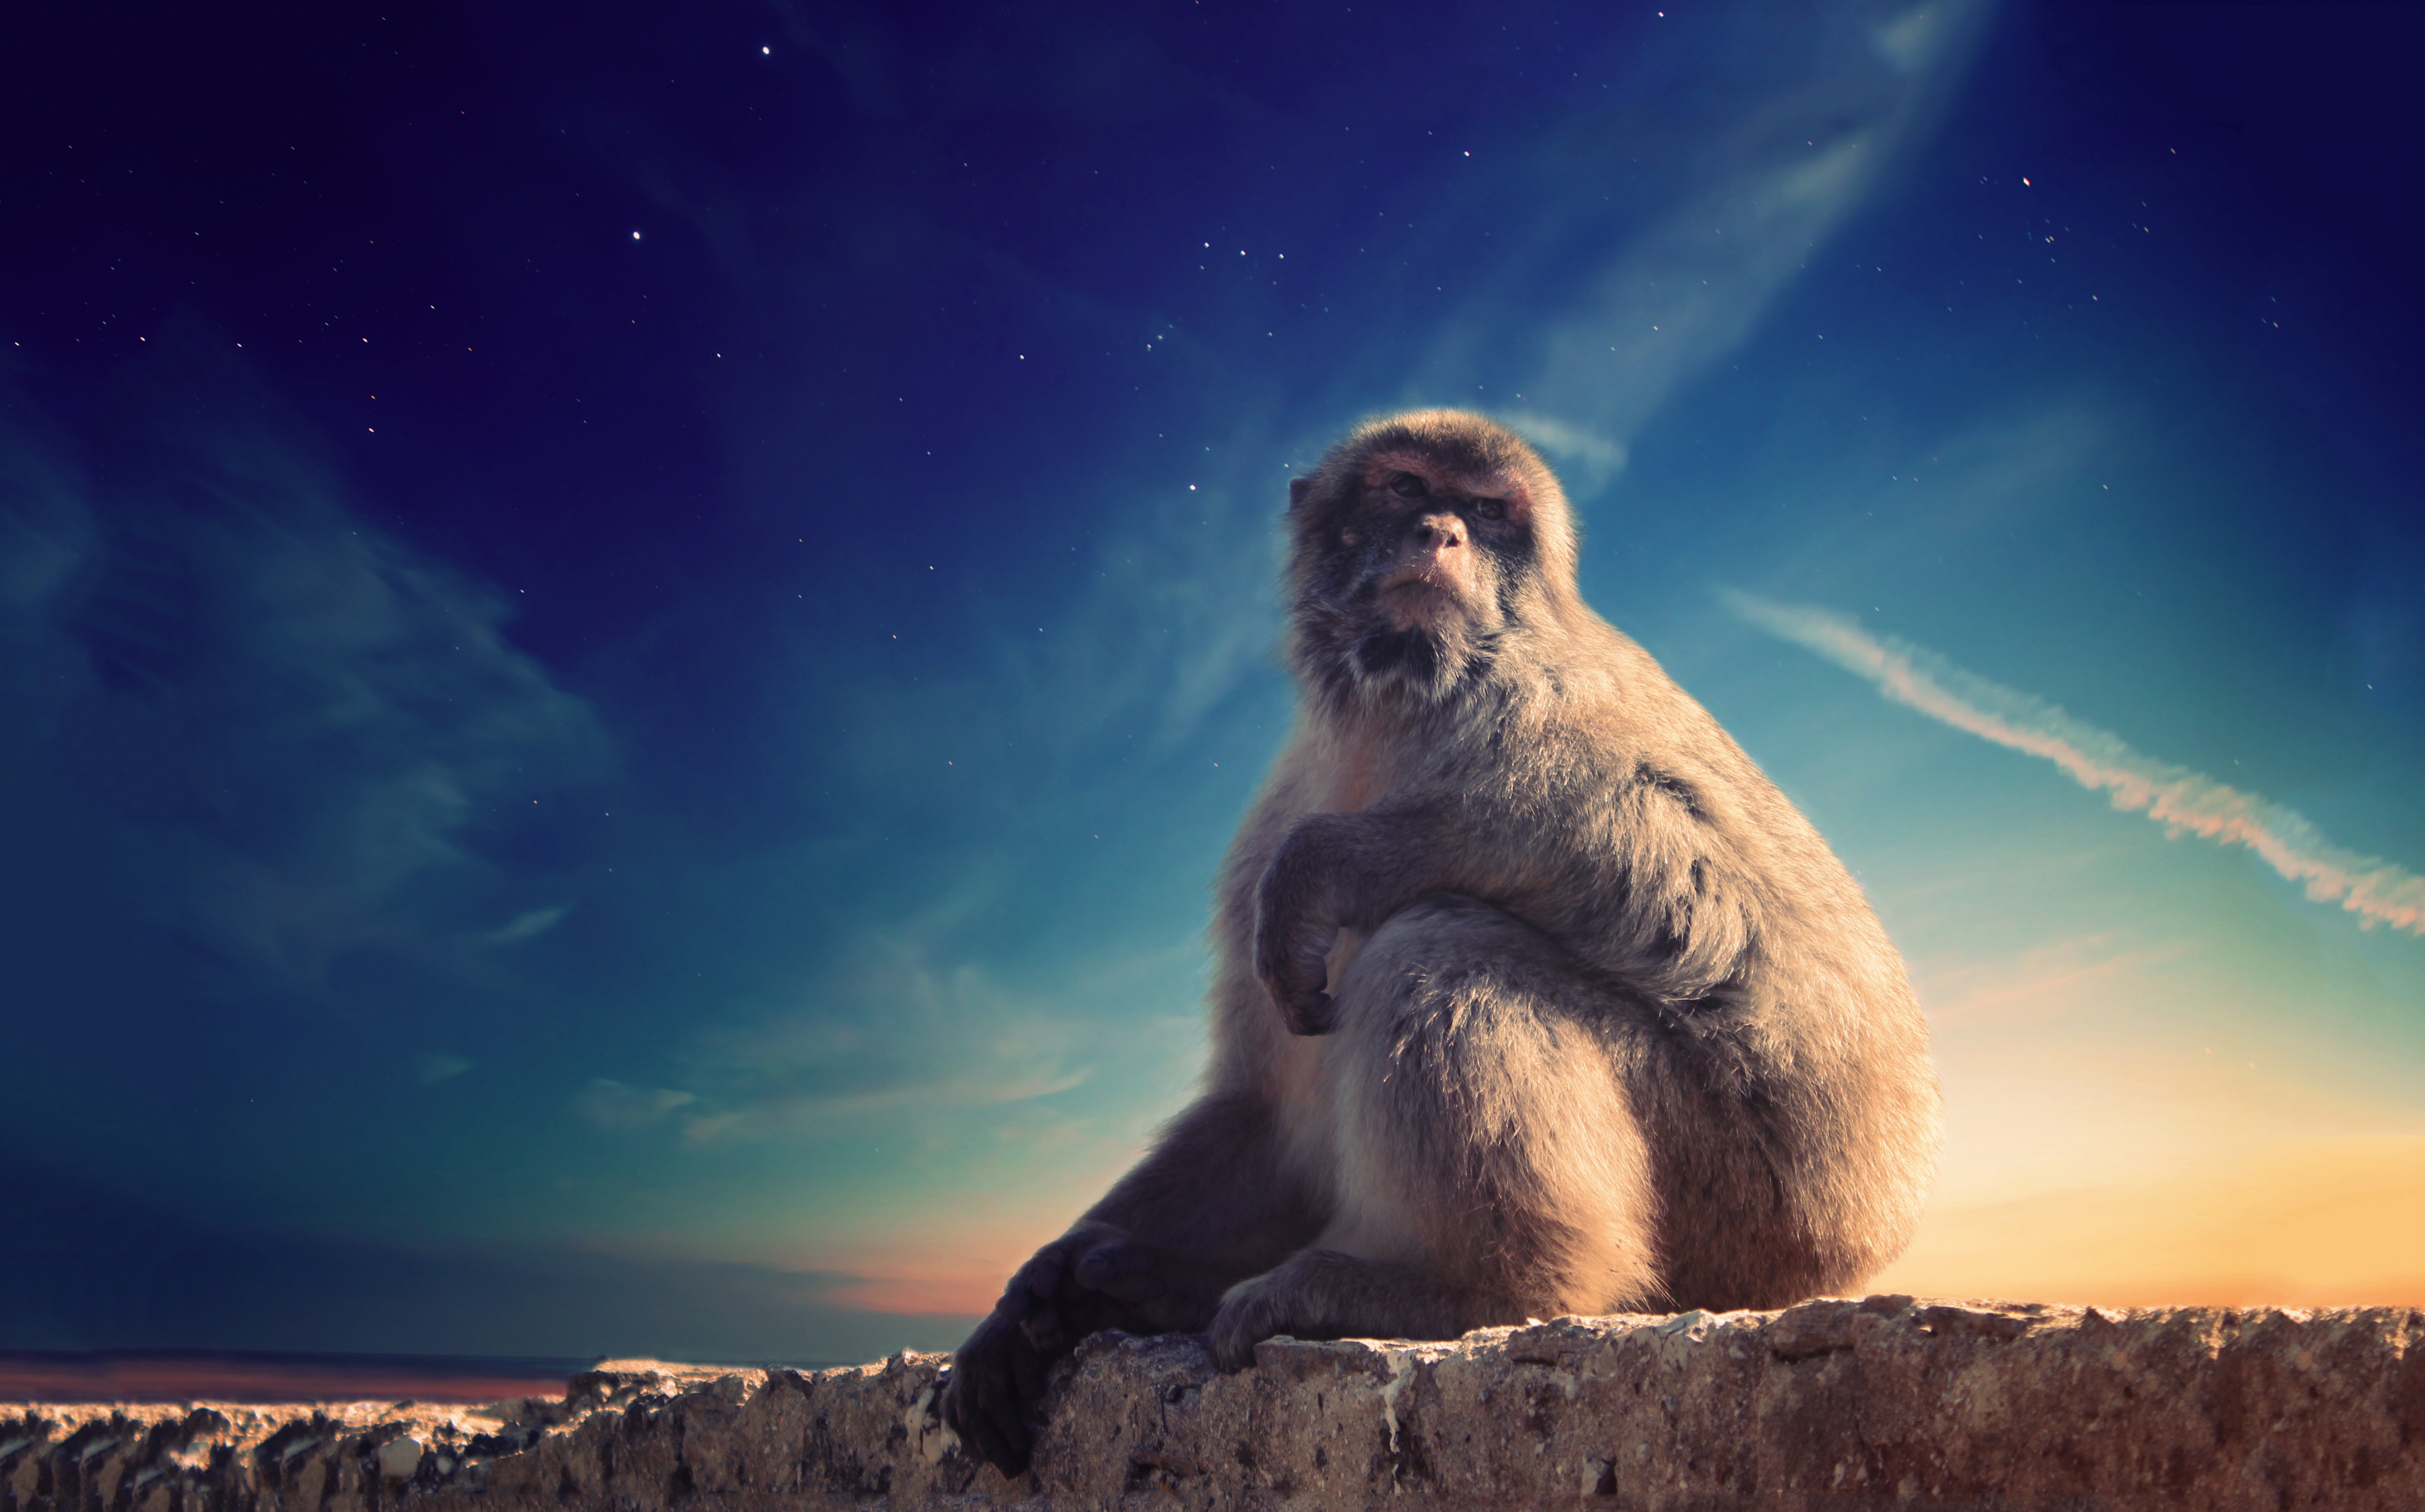 animals, monkey, wildlife, animal, is sitting, sits, primate, conceived, put up